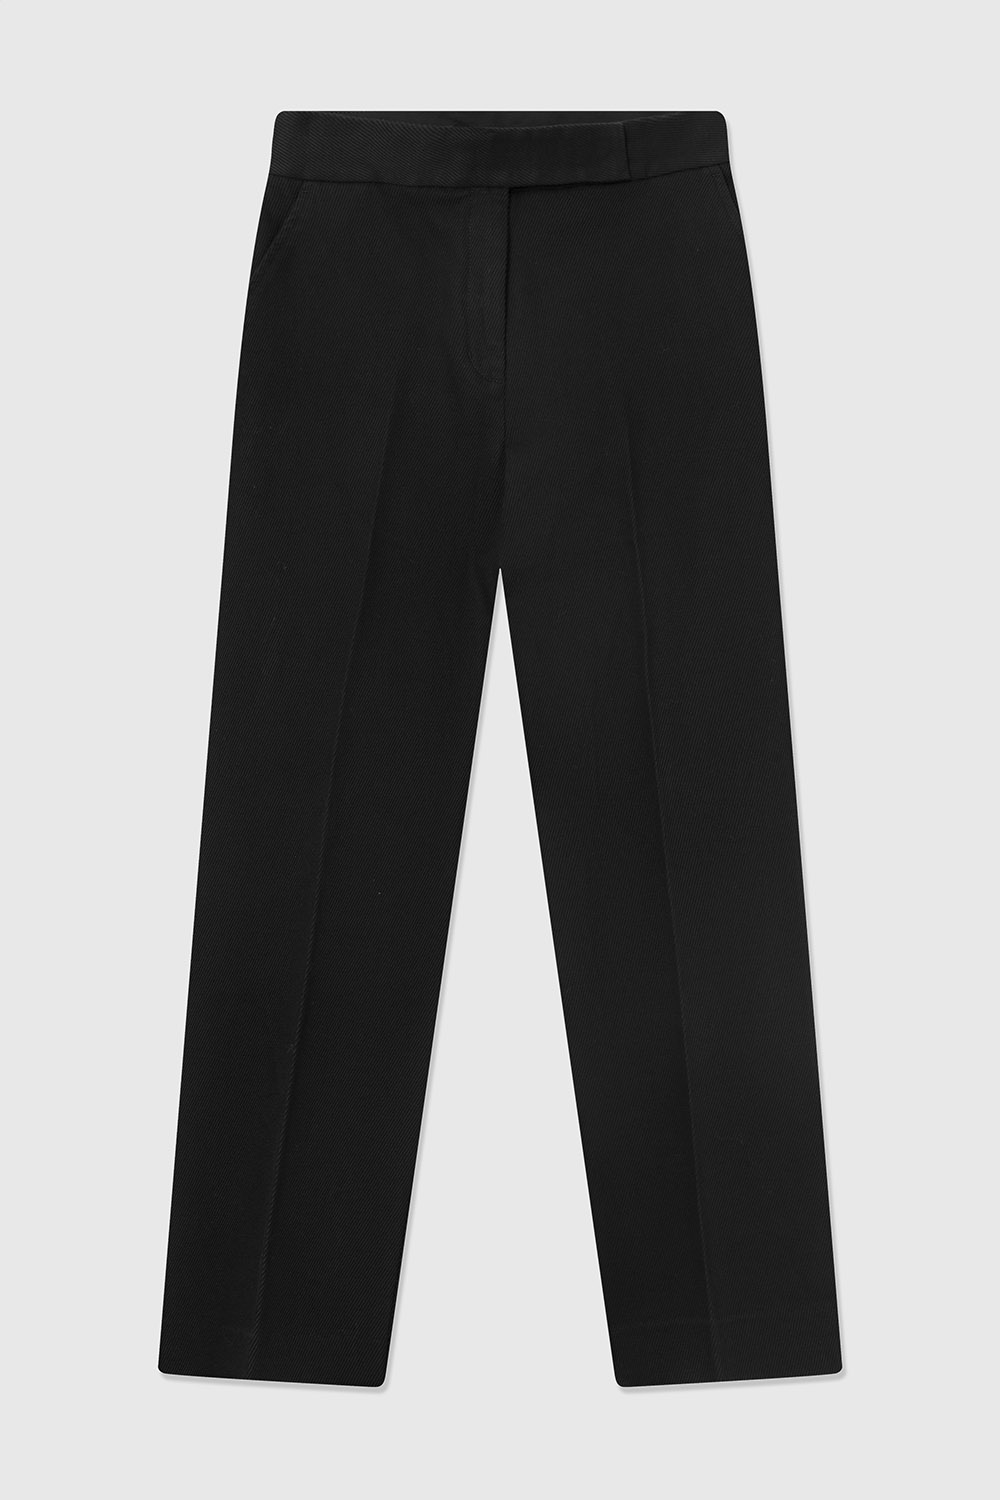 Wood Wood Willow dry twill trousers Black | WoodWood.com